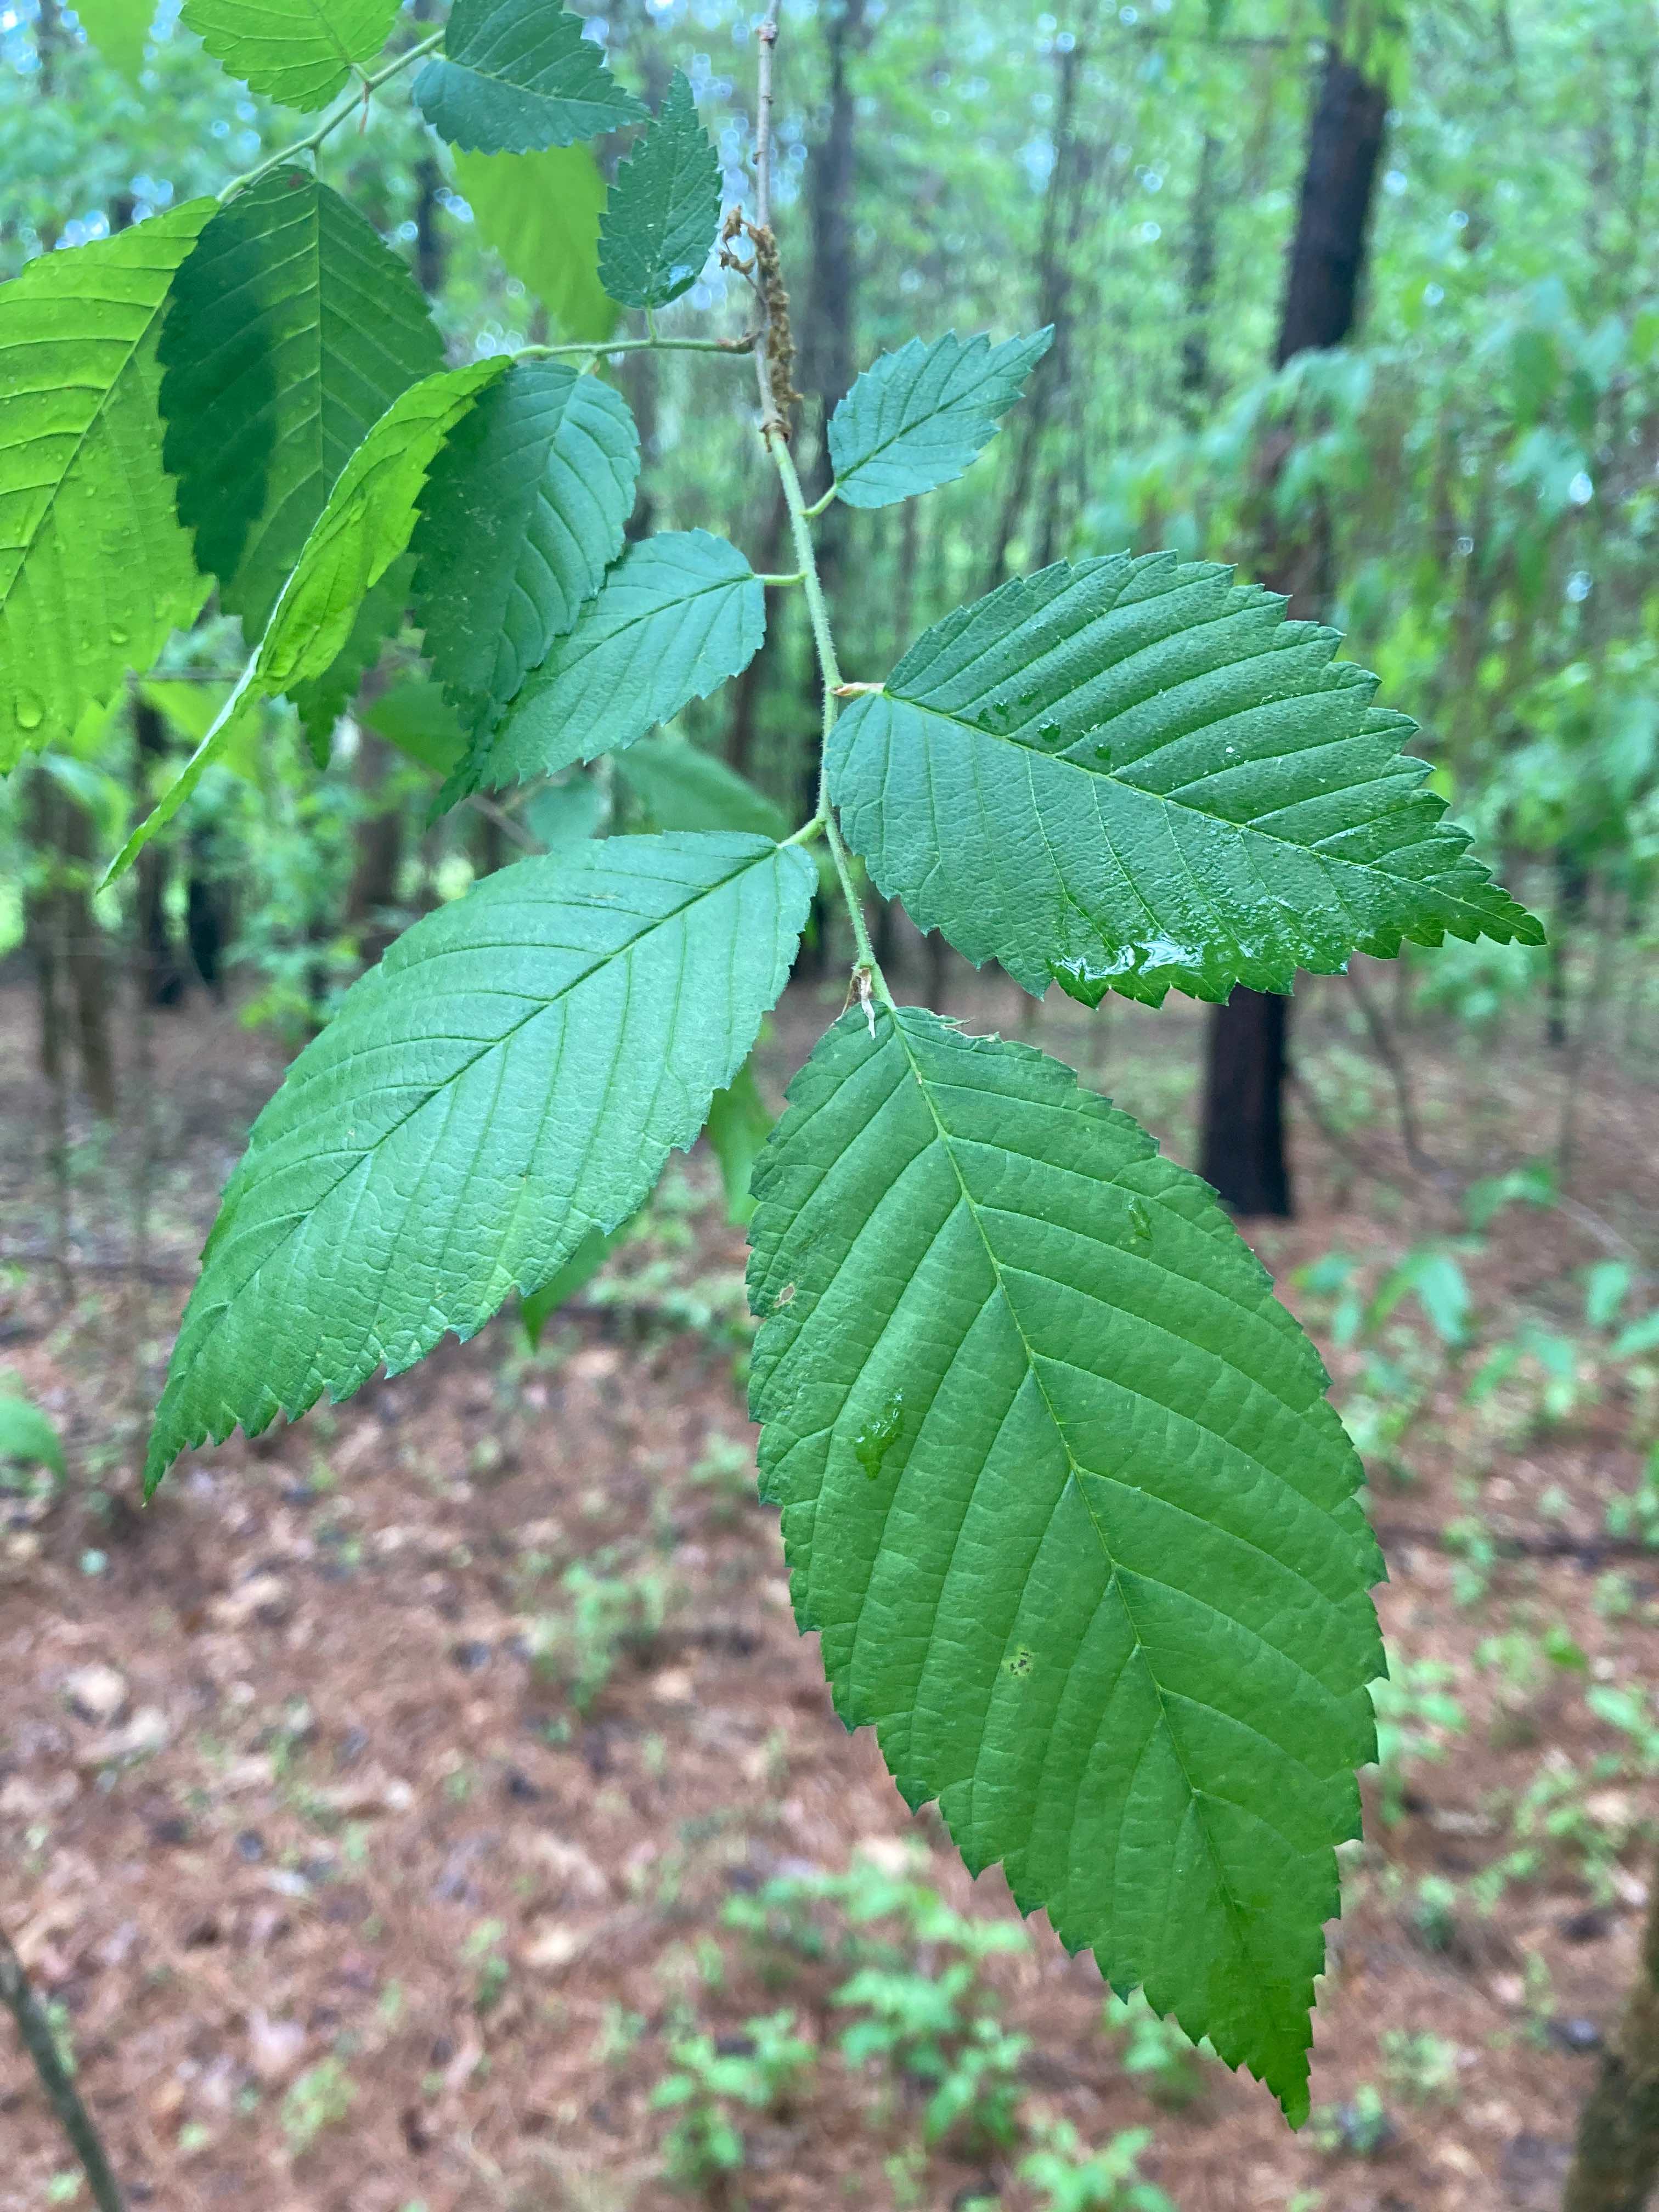 The Scientific Name is Ulmus americana. You will likely hear them called American Elm, White Elm. This picture shows the Leaves have asymmetric bases, parallel venation, and serrated margins. of Ulmus americana